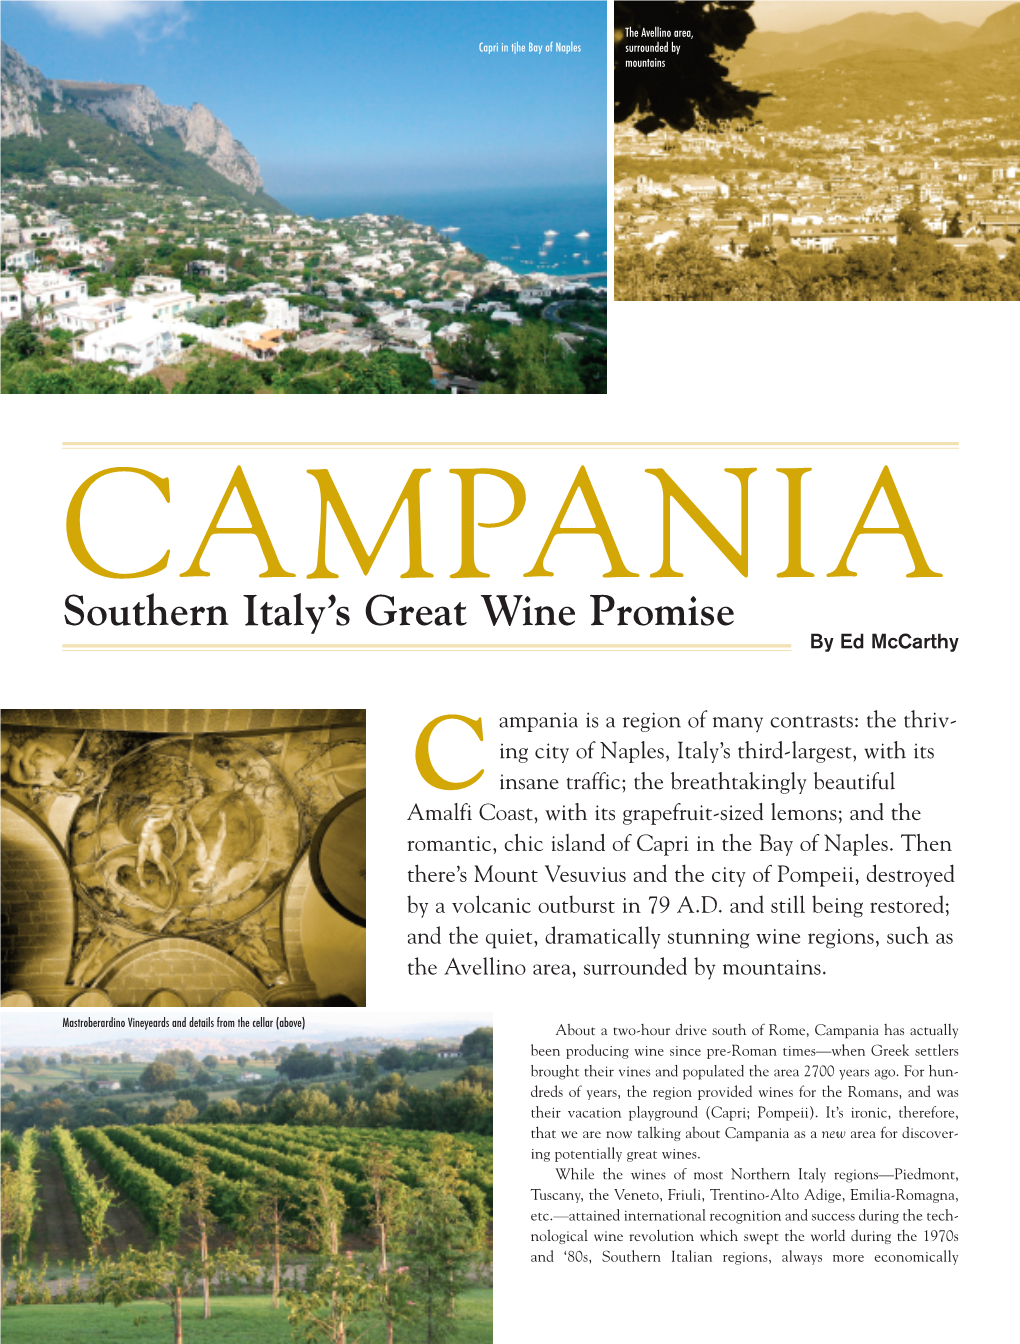 Southern Italy's Great Wine Promise